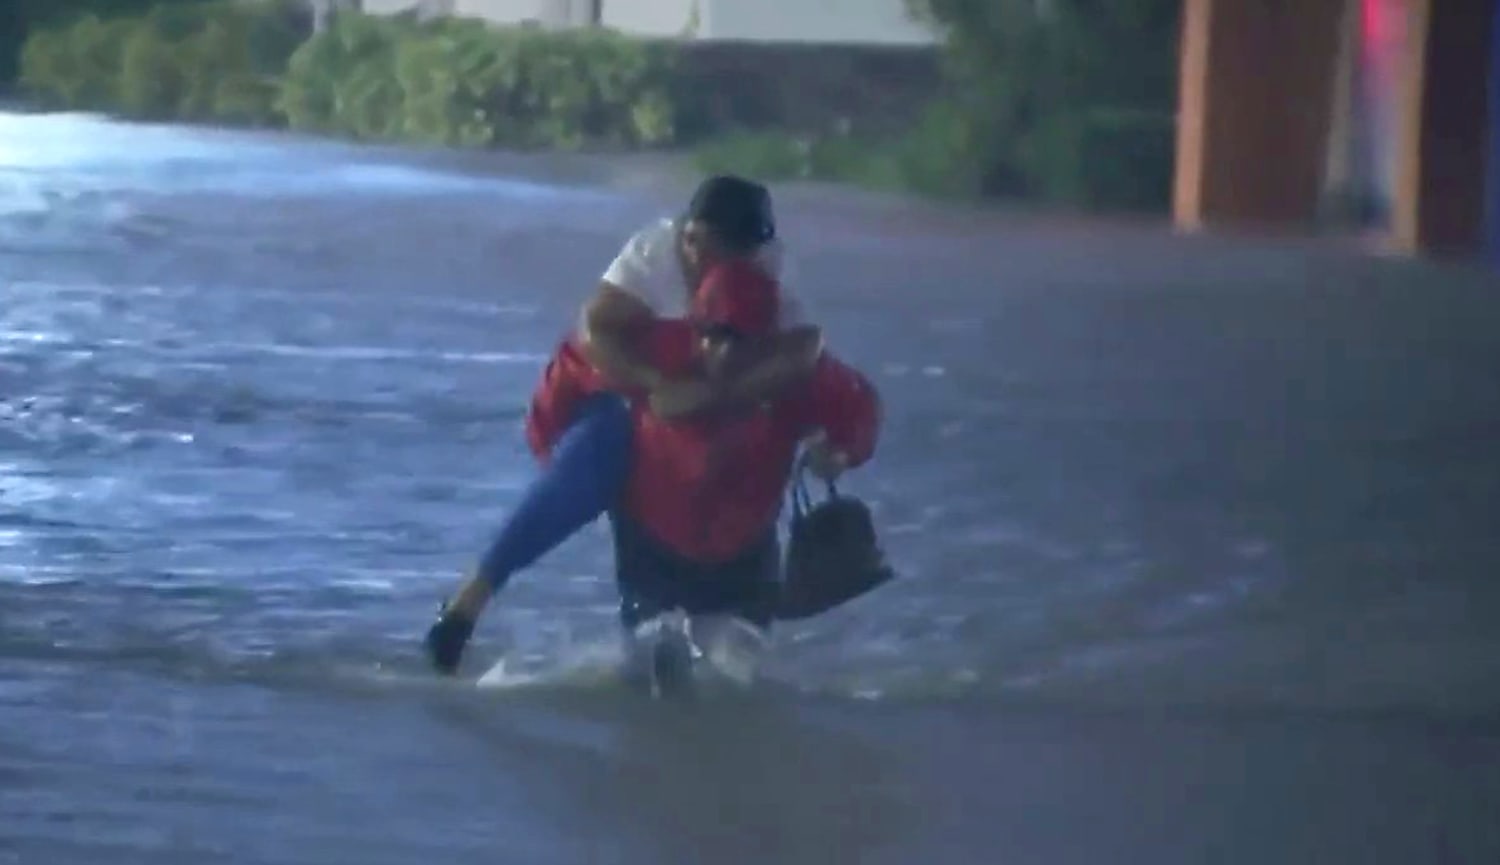 Hurricane Ian videos capture heroic rescues and widespread devastation in Florida